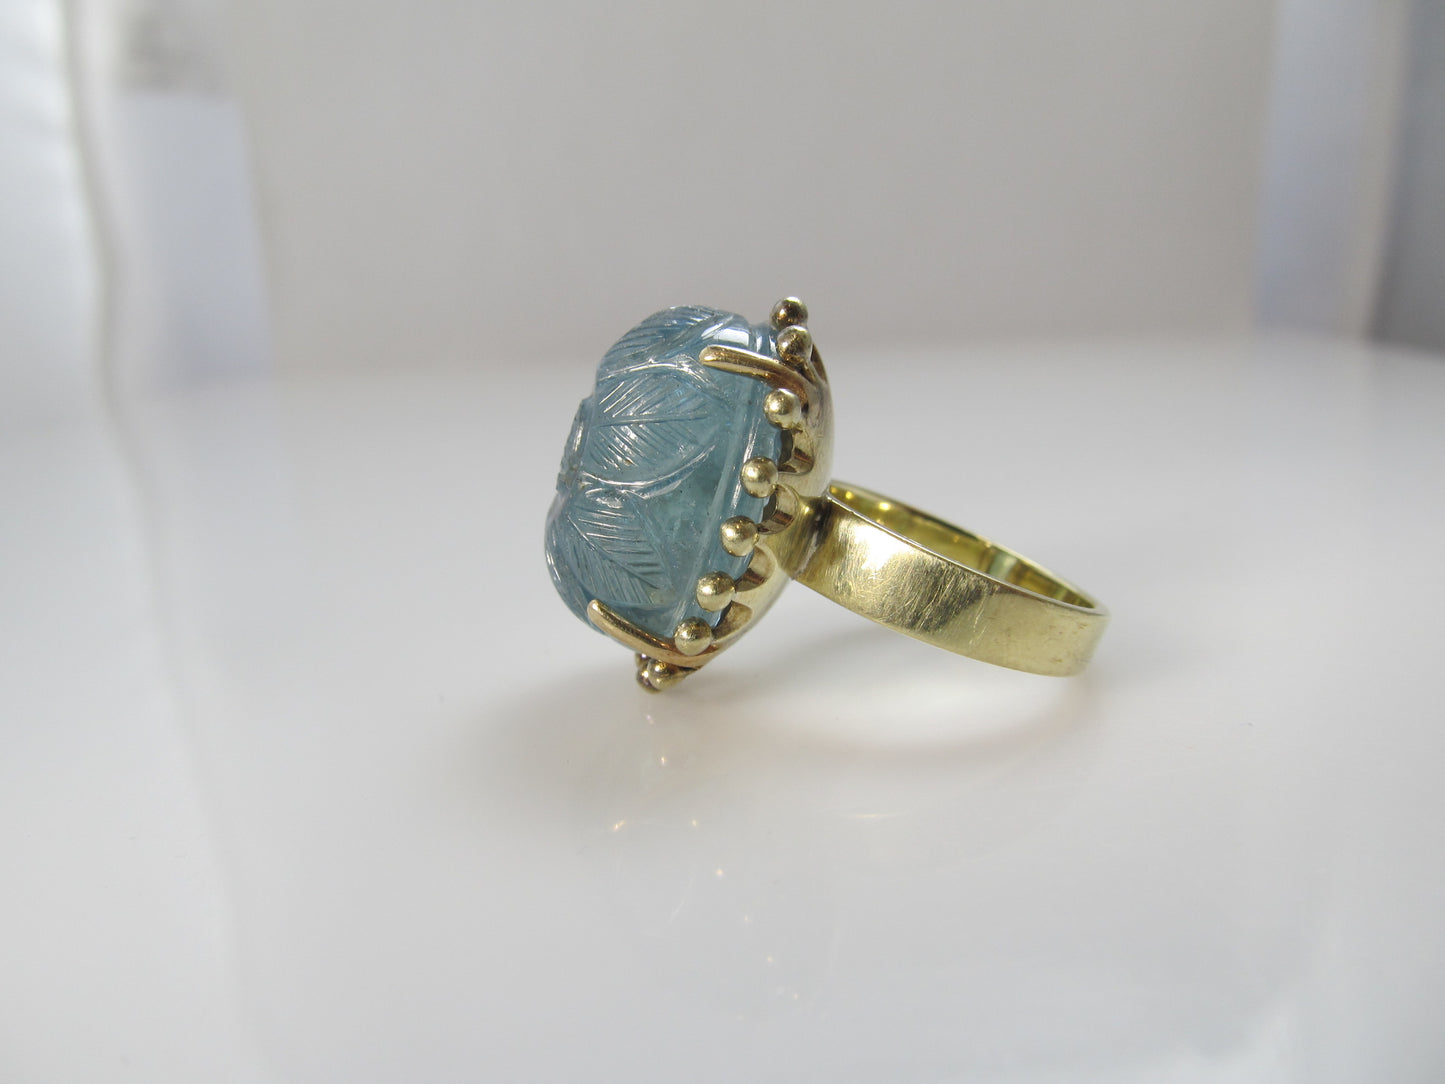 20.00ct carved aquamarine ring in 14k yellow gold